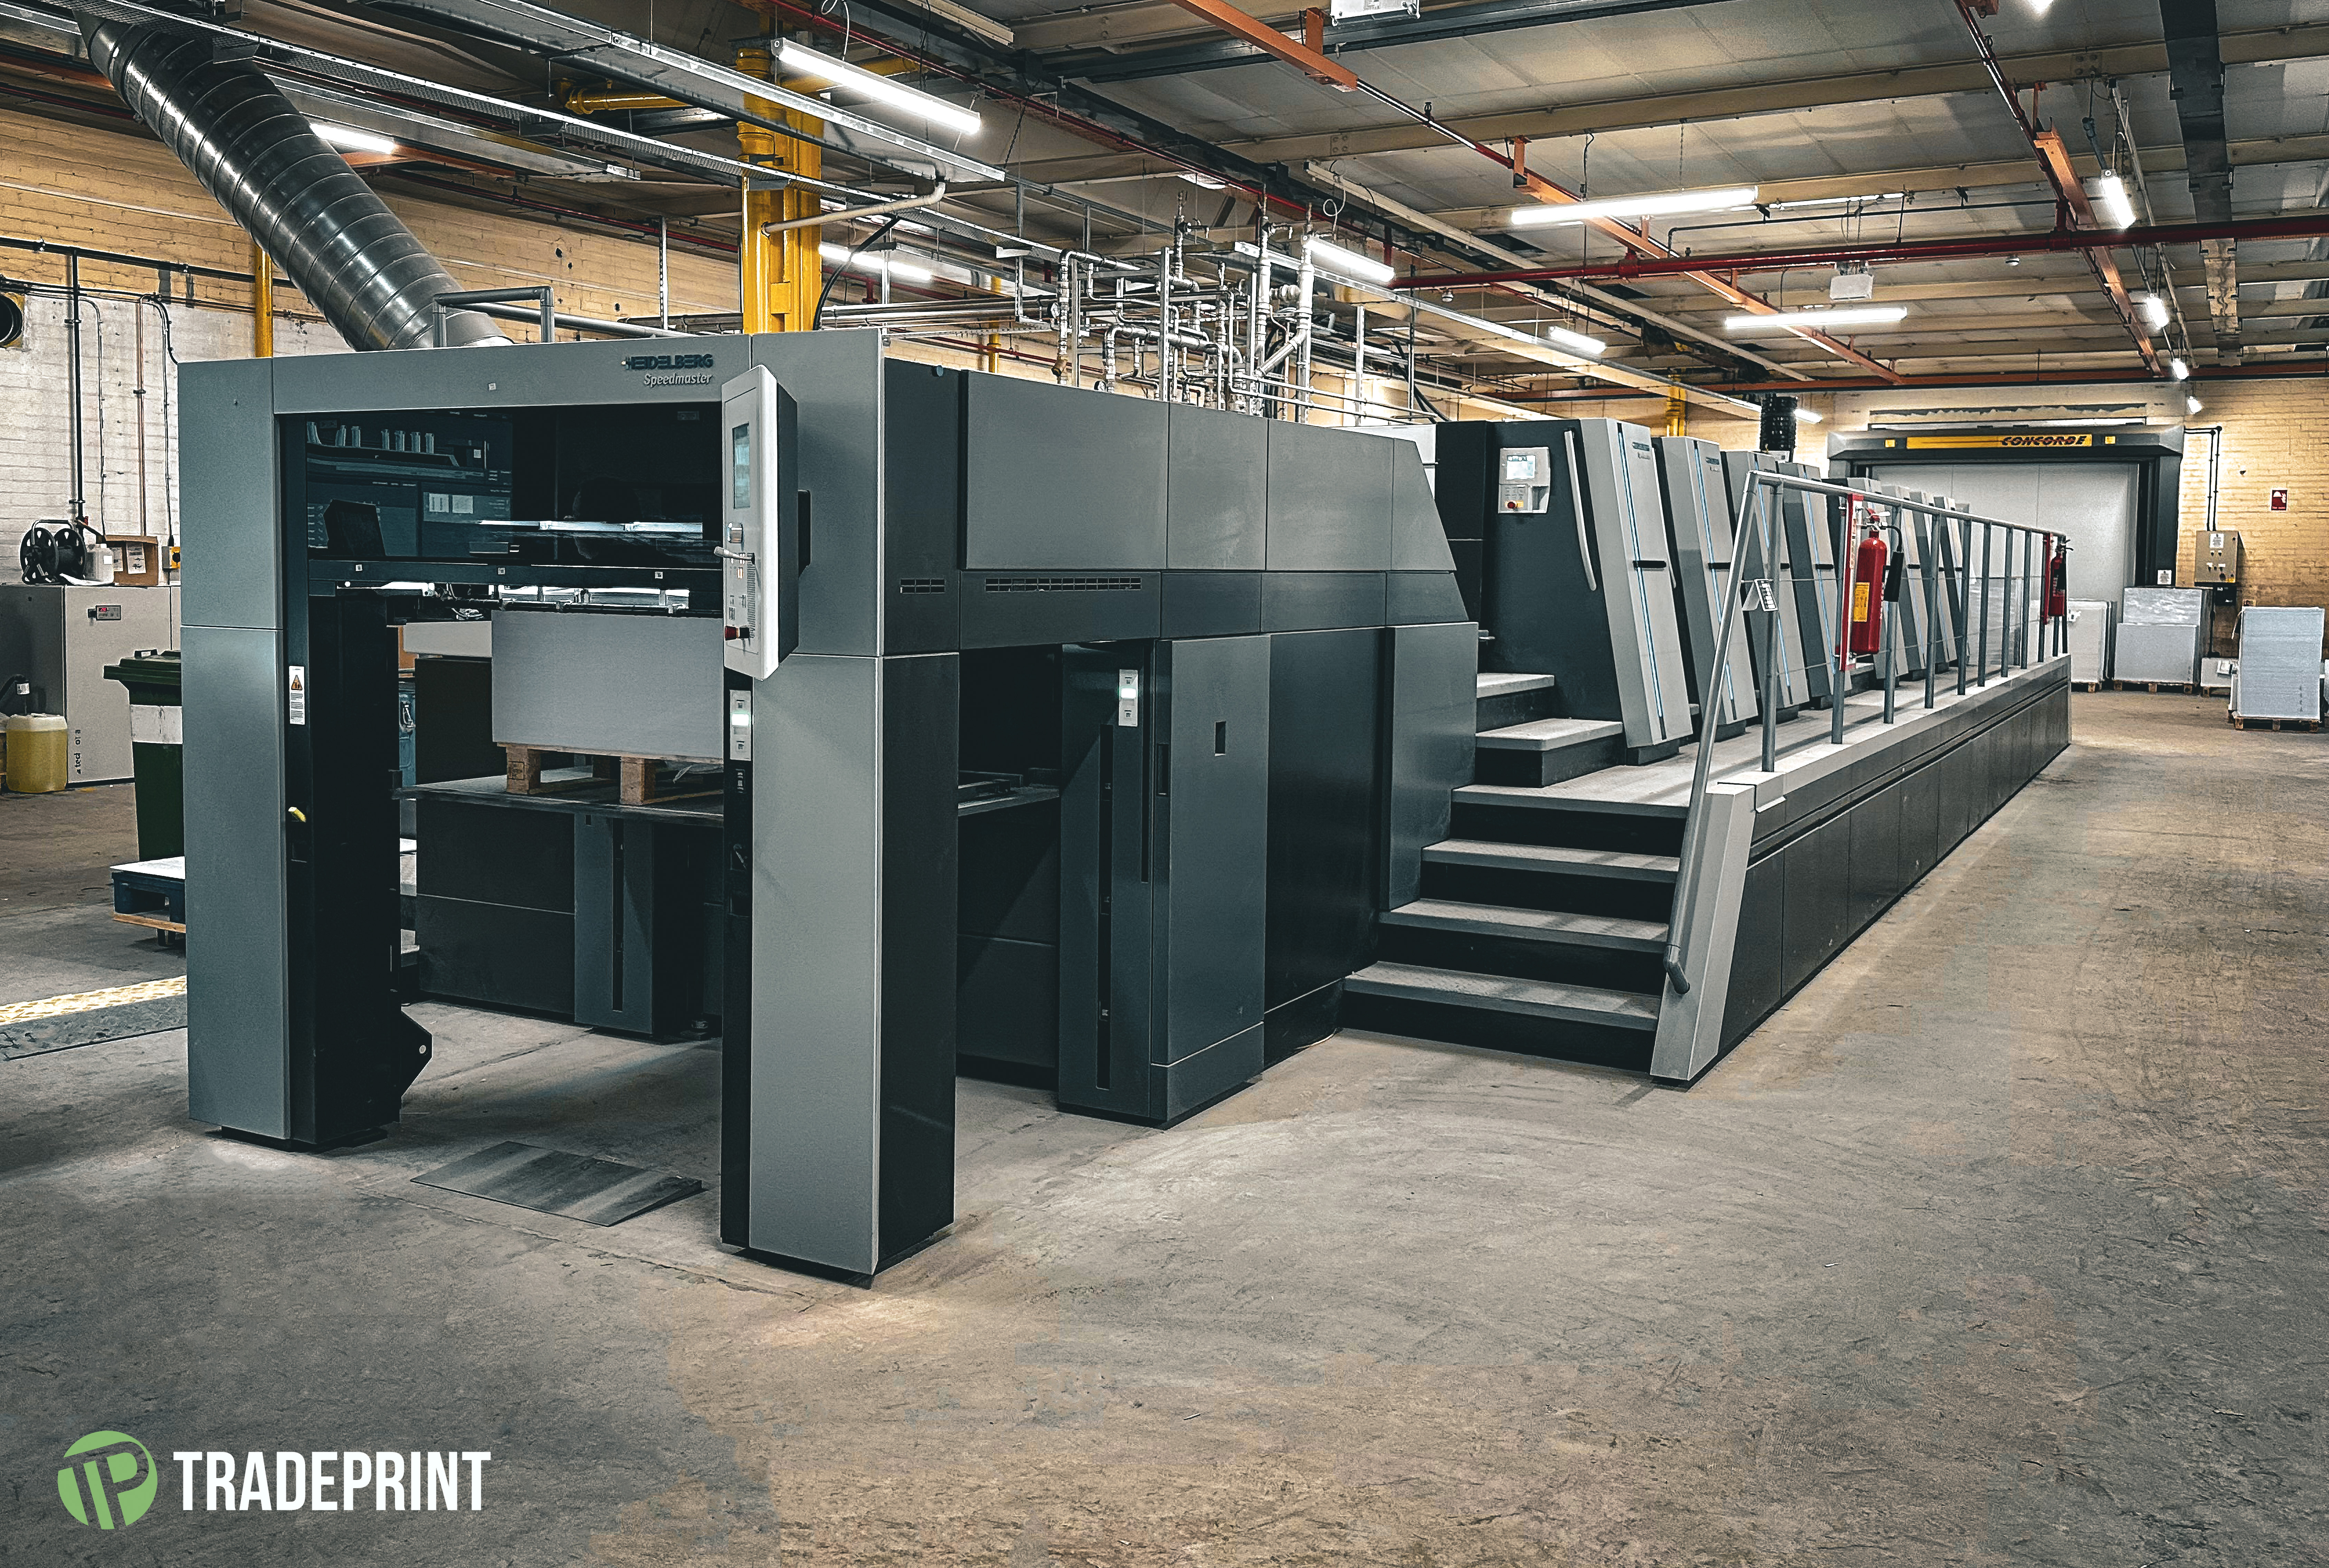 Tradeprint boosts productivity with LED Push-to-Stop technology